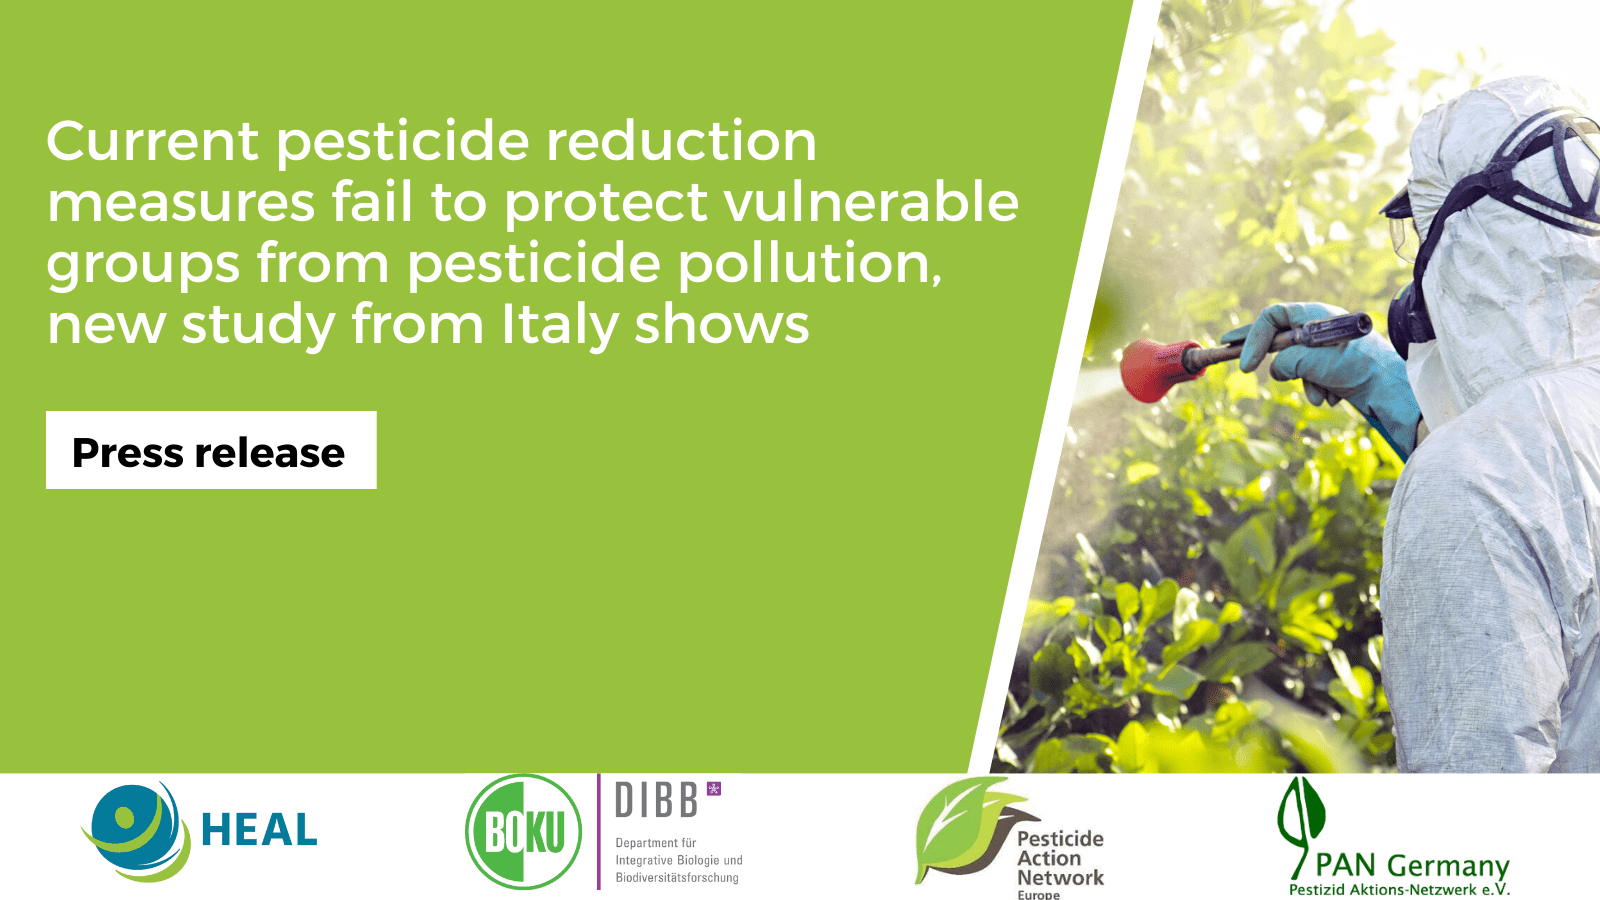 Current pesticide reduction measures fail to protect vulnerable groups from pesticide pollution, new study from Italy shows